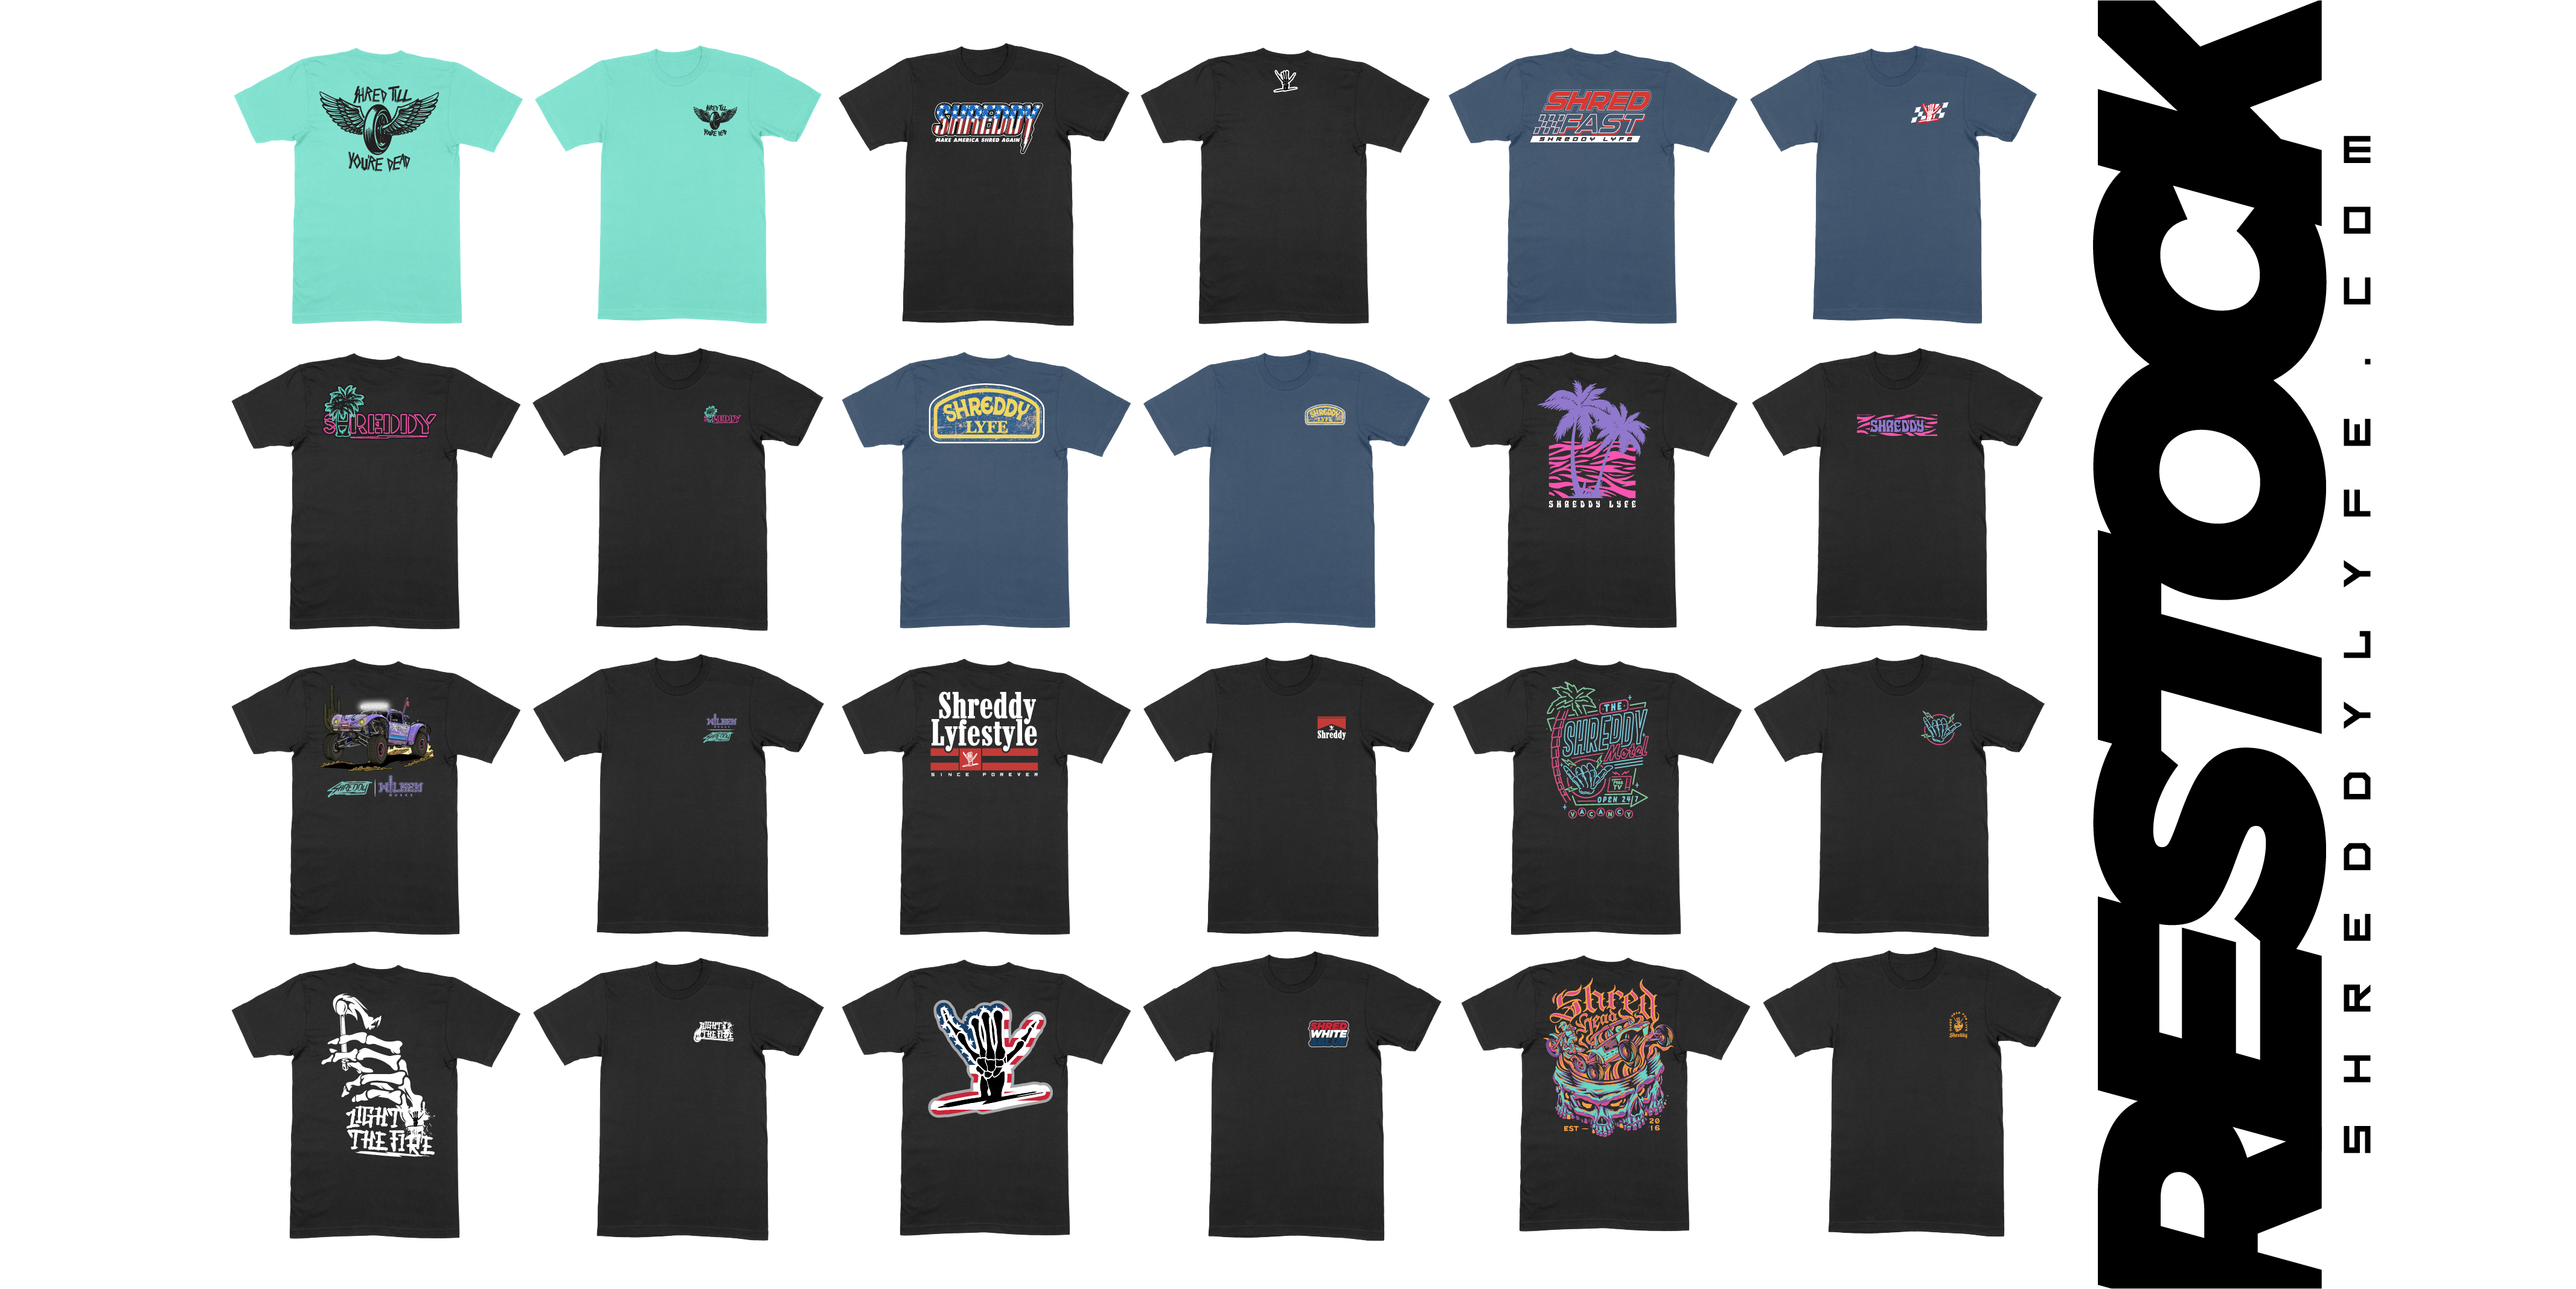 Shreddy Lyfe Shirt Collection Restocked, Image of all shirts